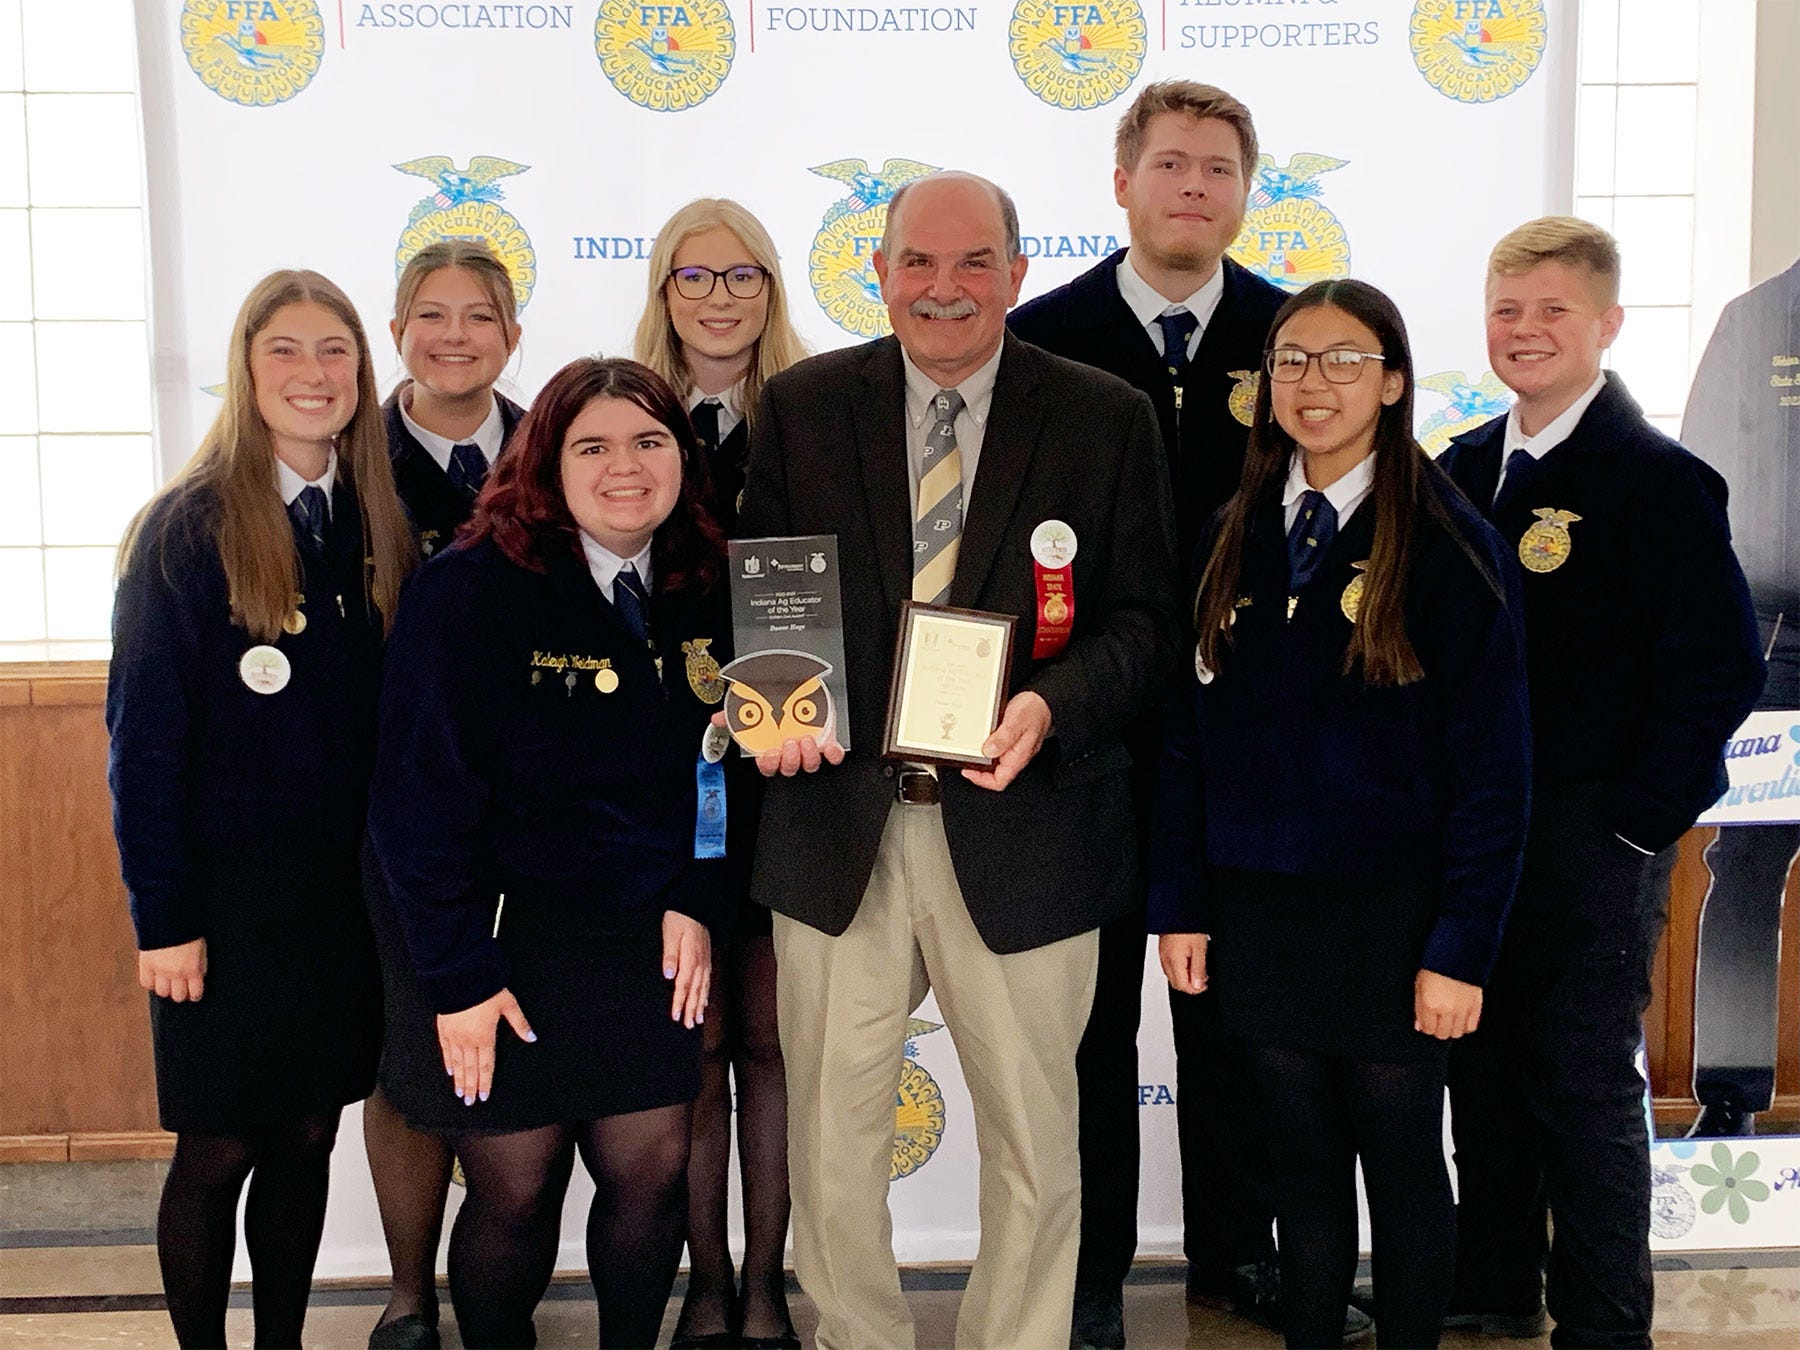 Duane Huge holding two plaques, surrounded by FFA members